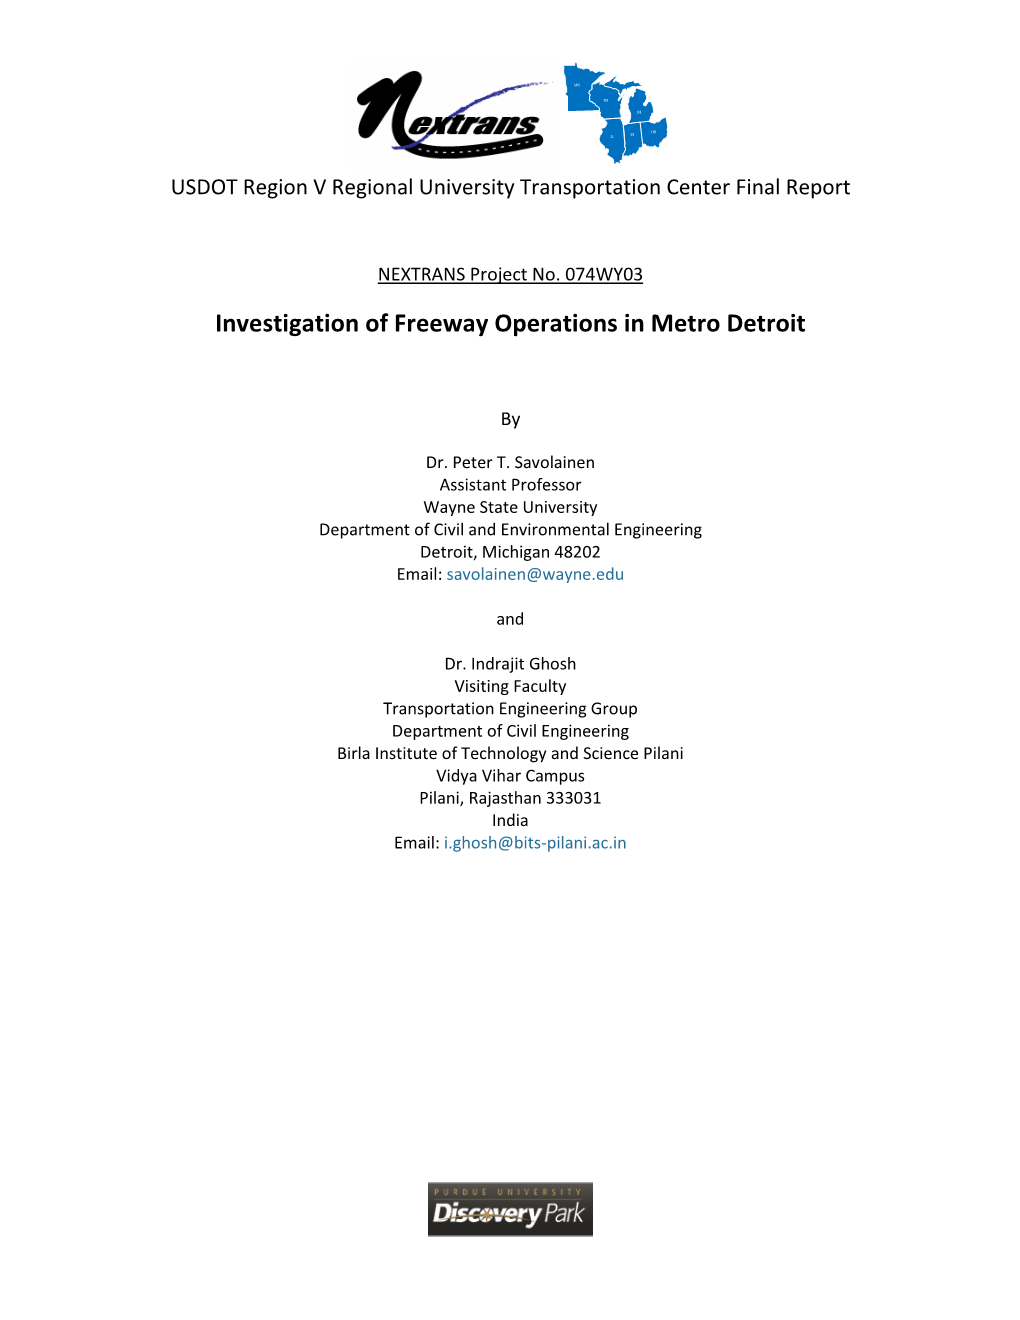 Investigation of Freeway Operations in Metro Detroit